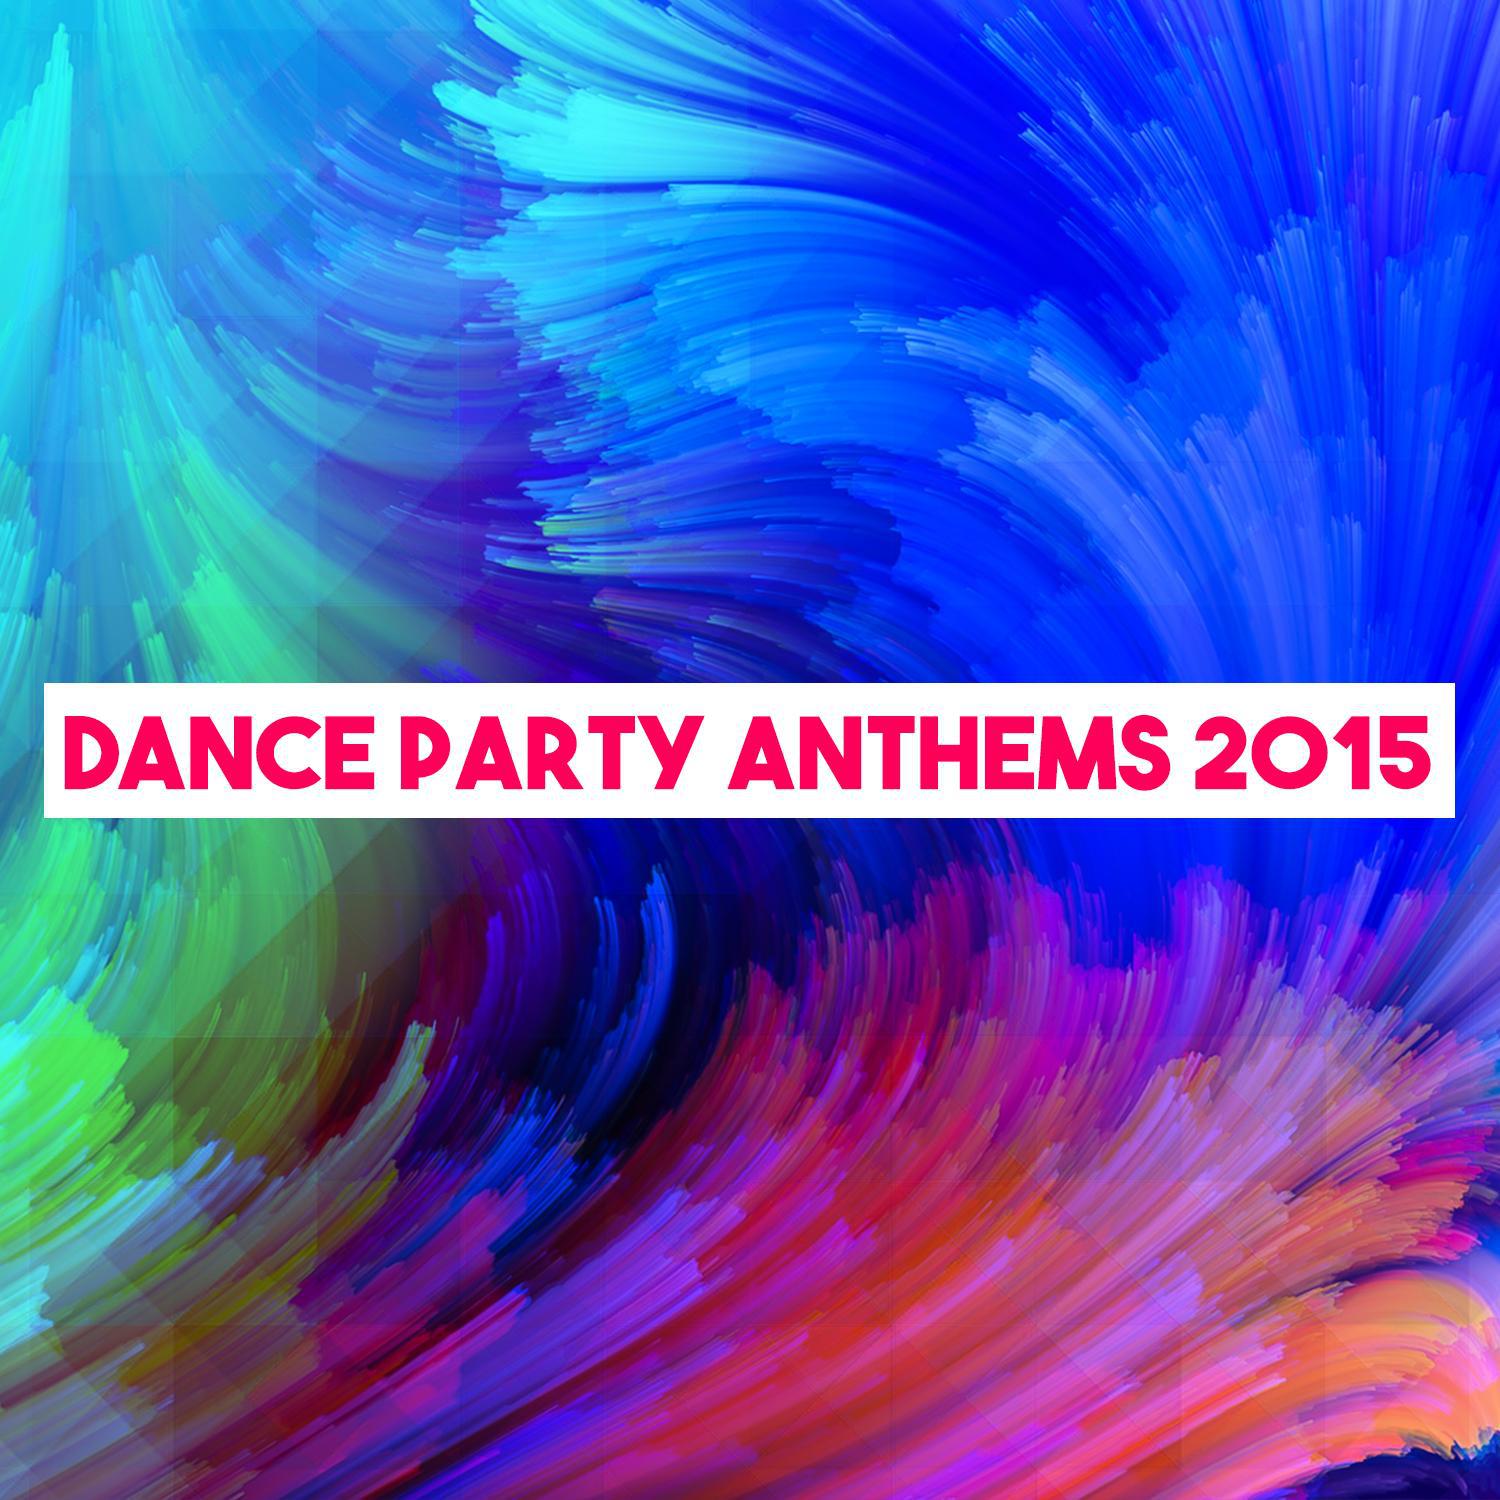 Dance Party Anthems 2015